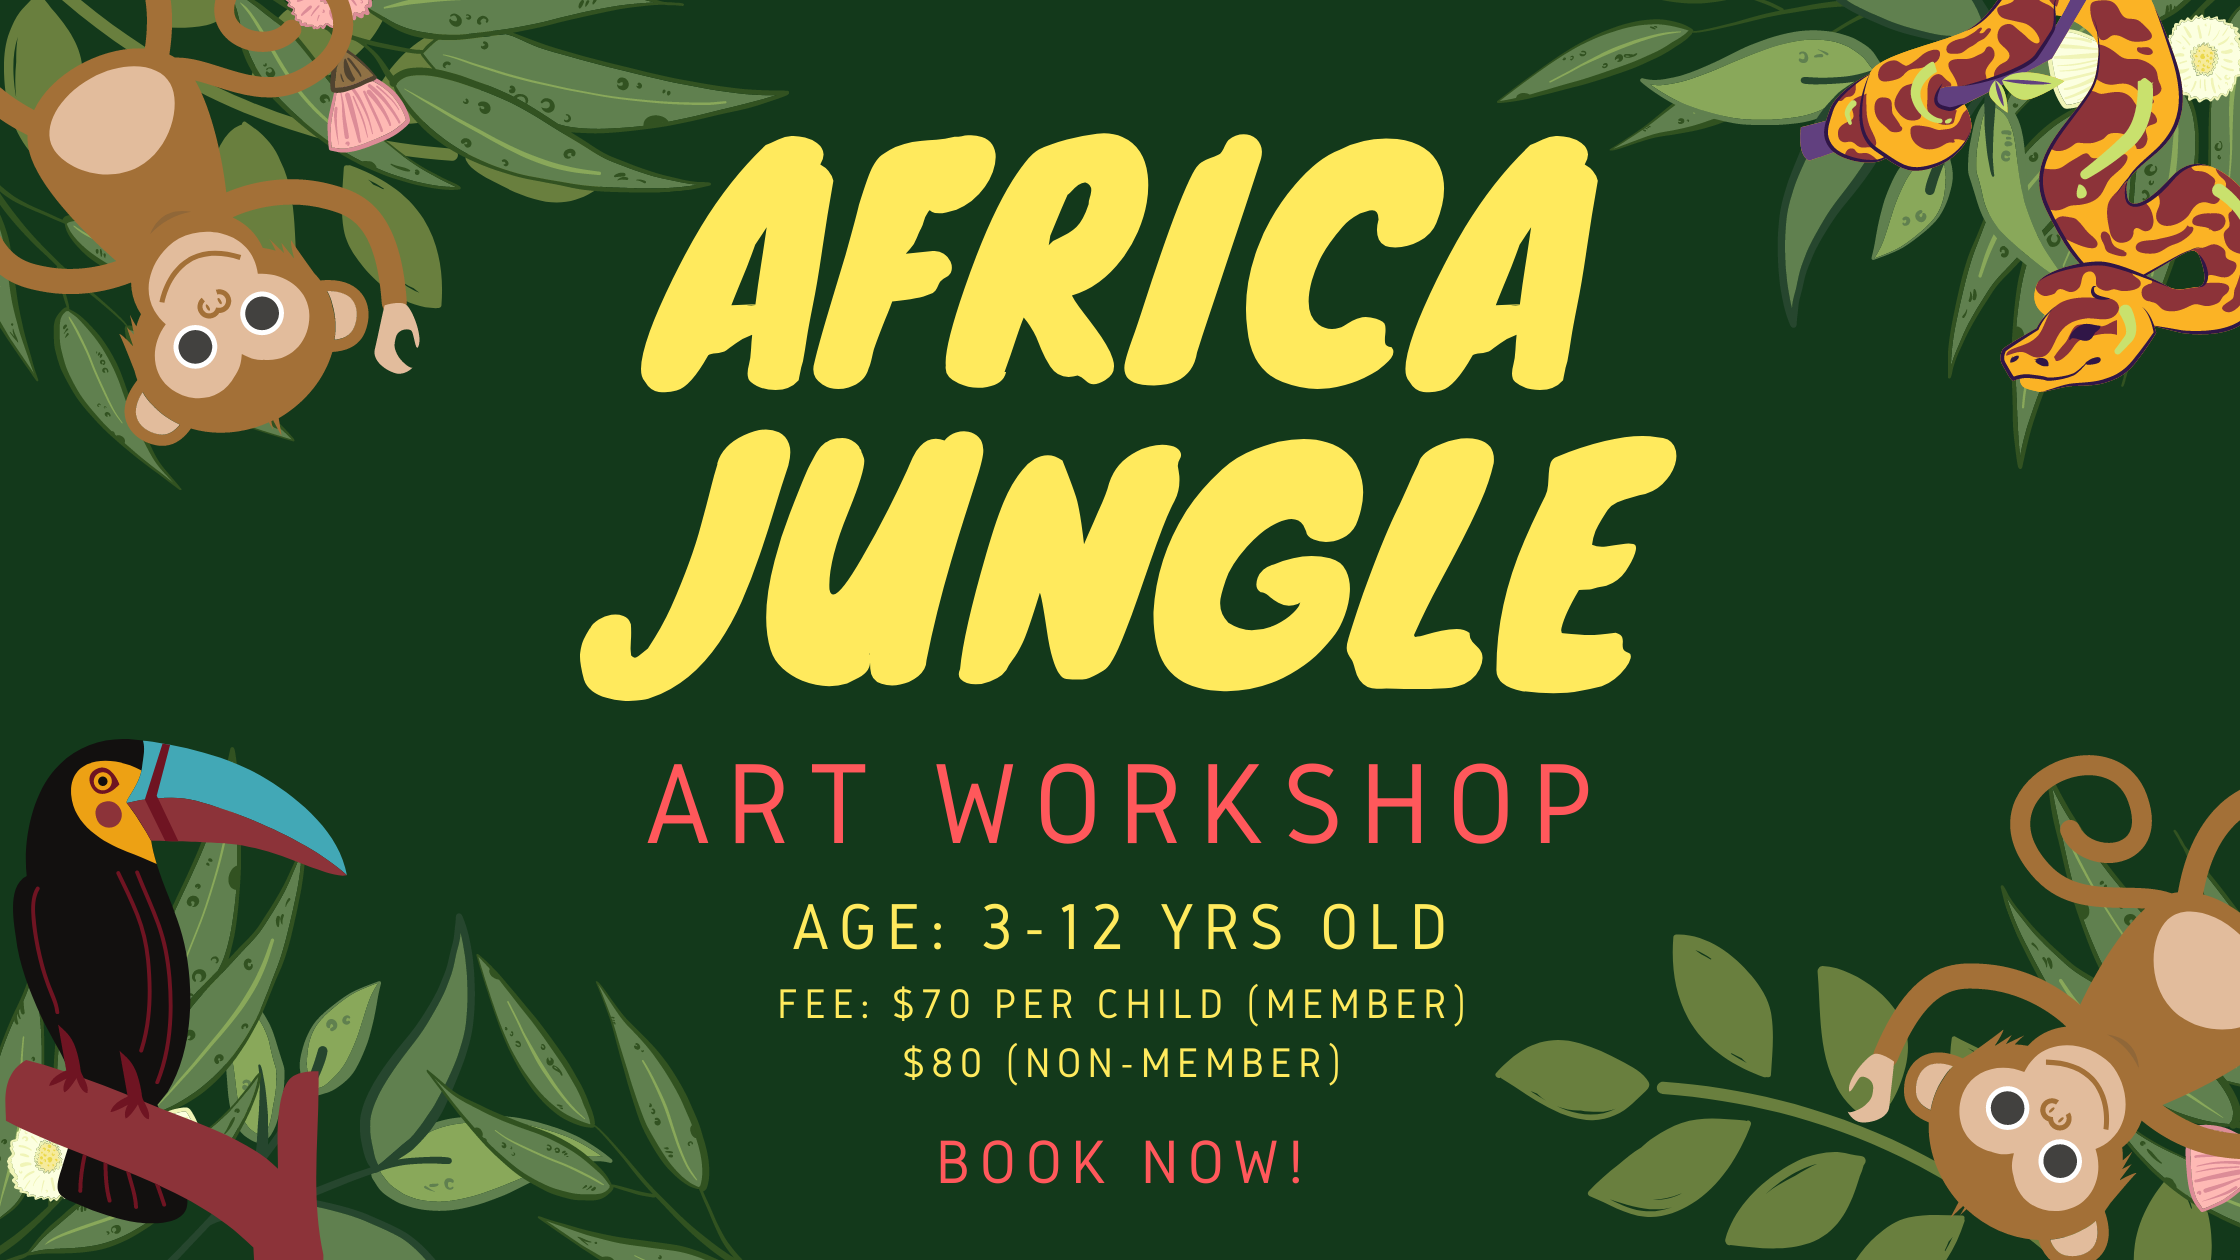 Africa Jungle Art Workshop for 3-12 years old